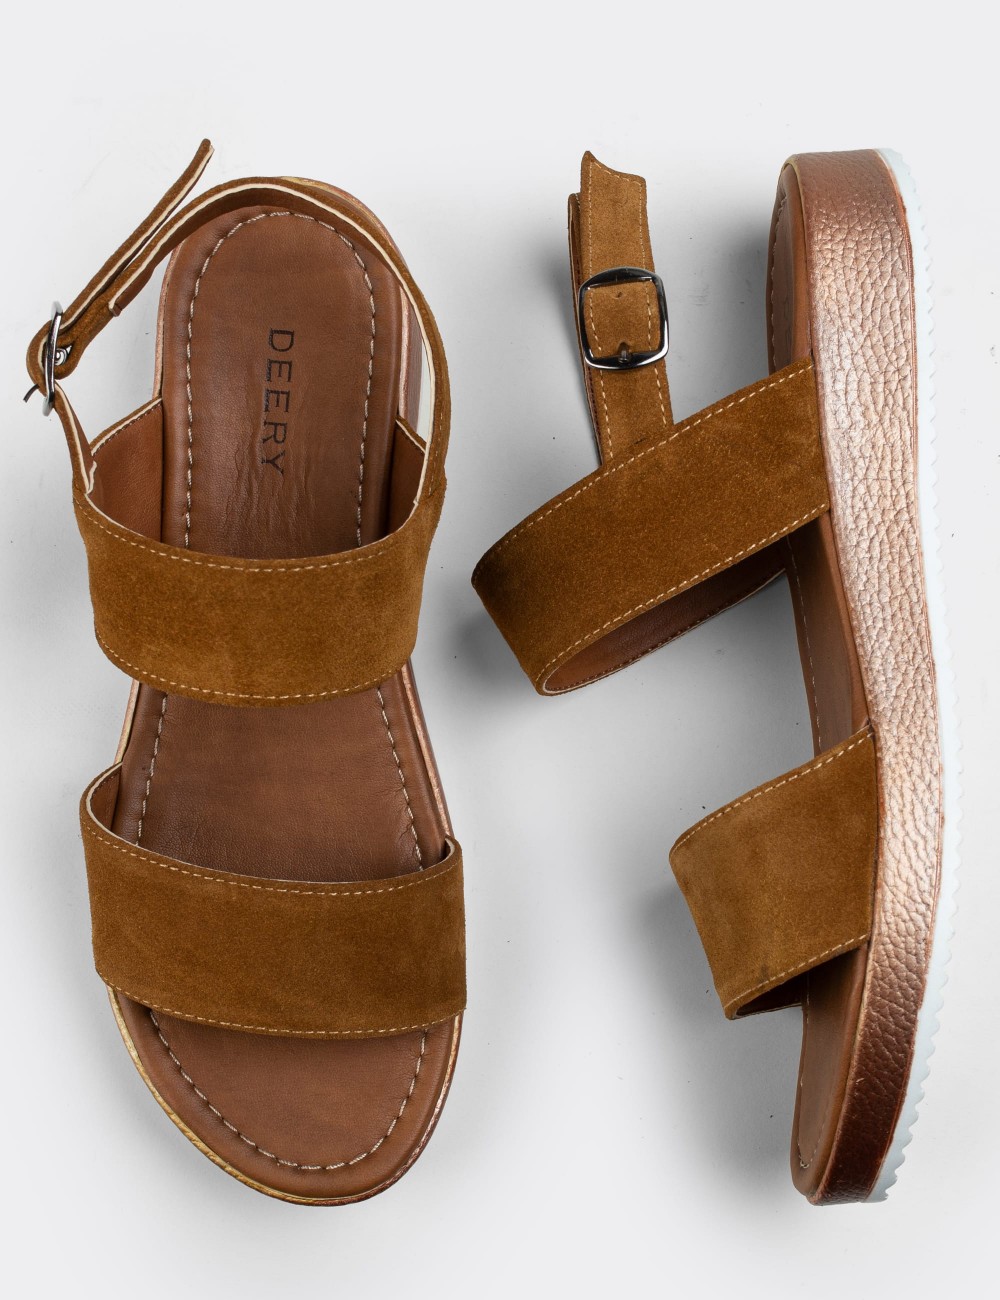 Tan Suede Leather Sandals - 02120ZTBAC03